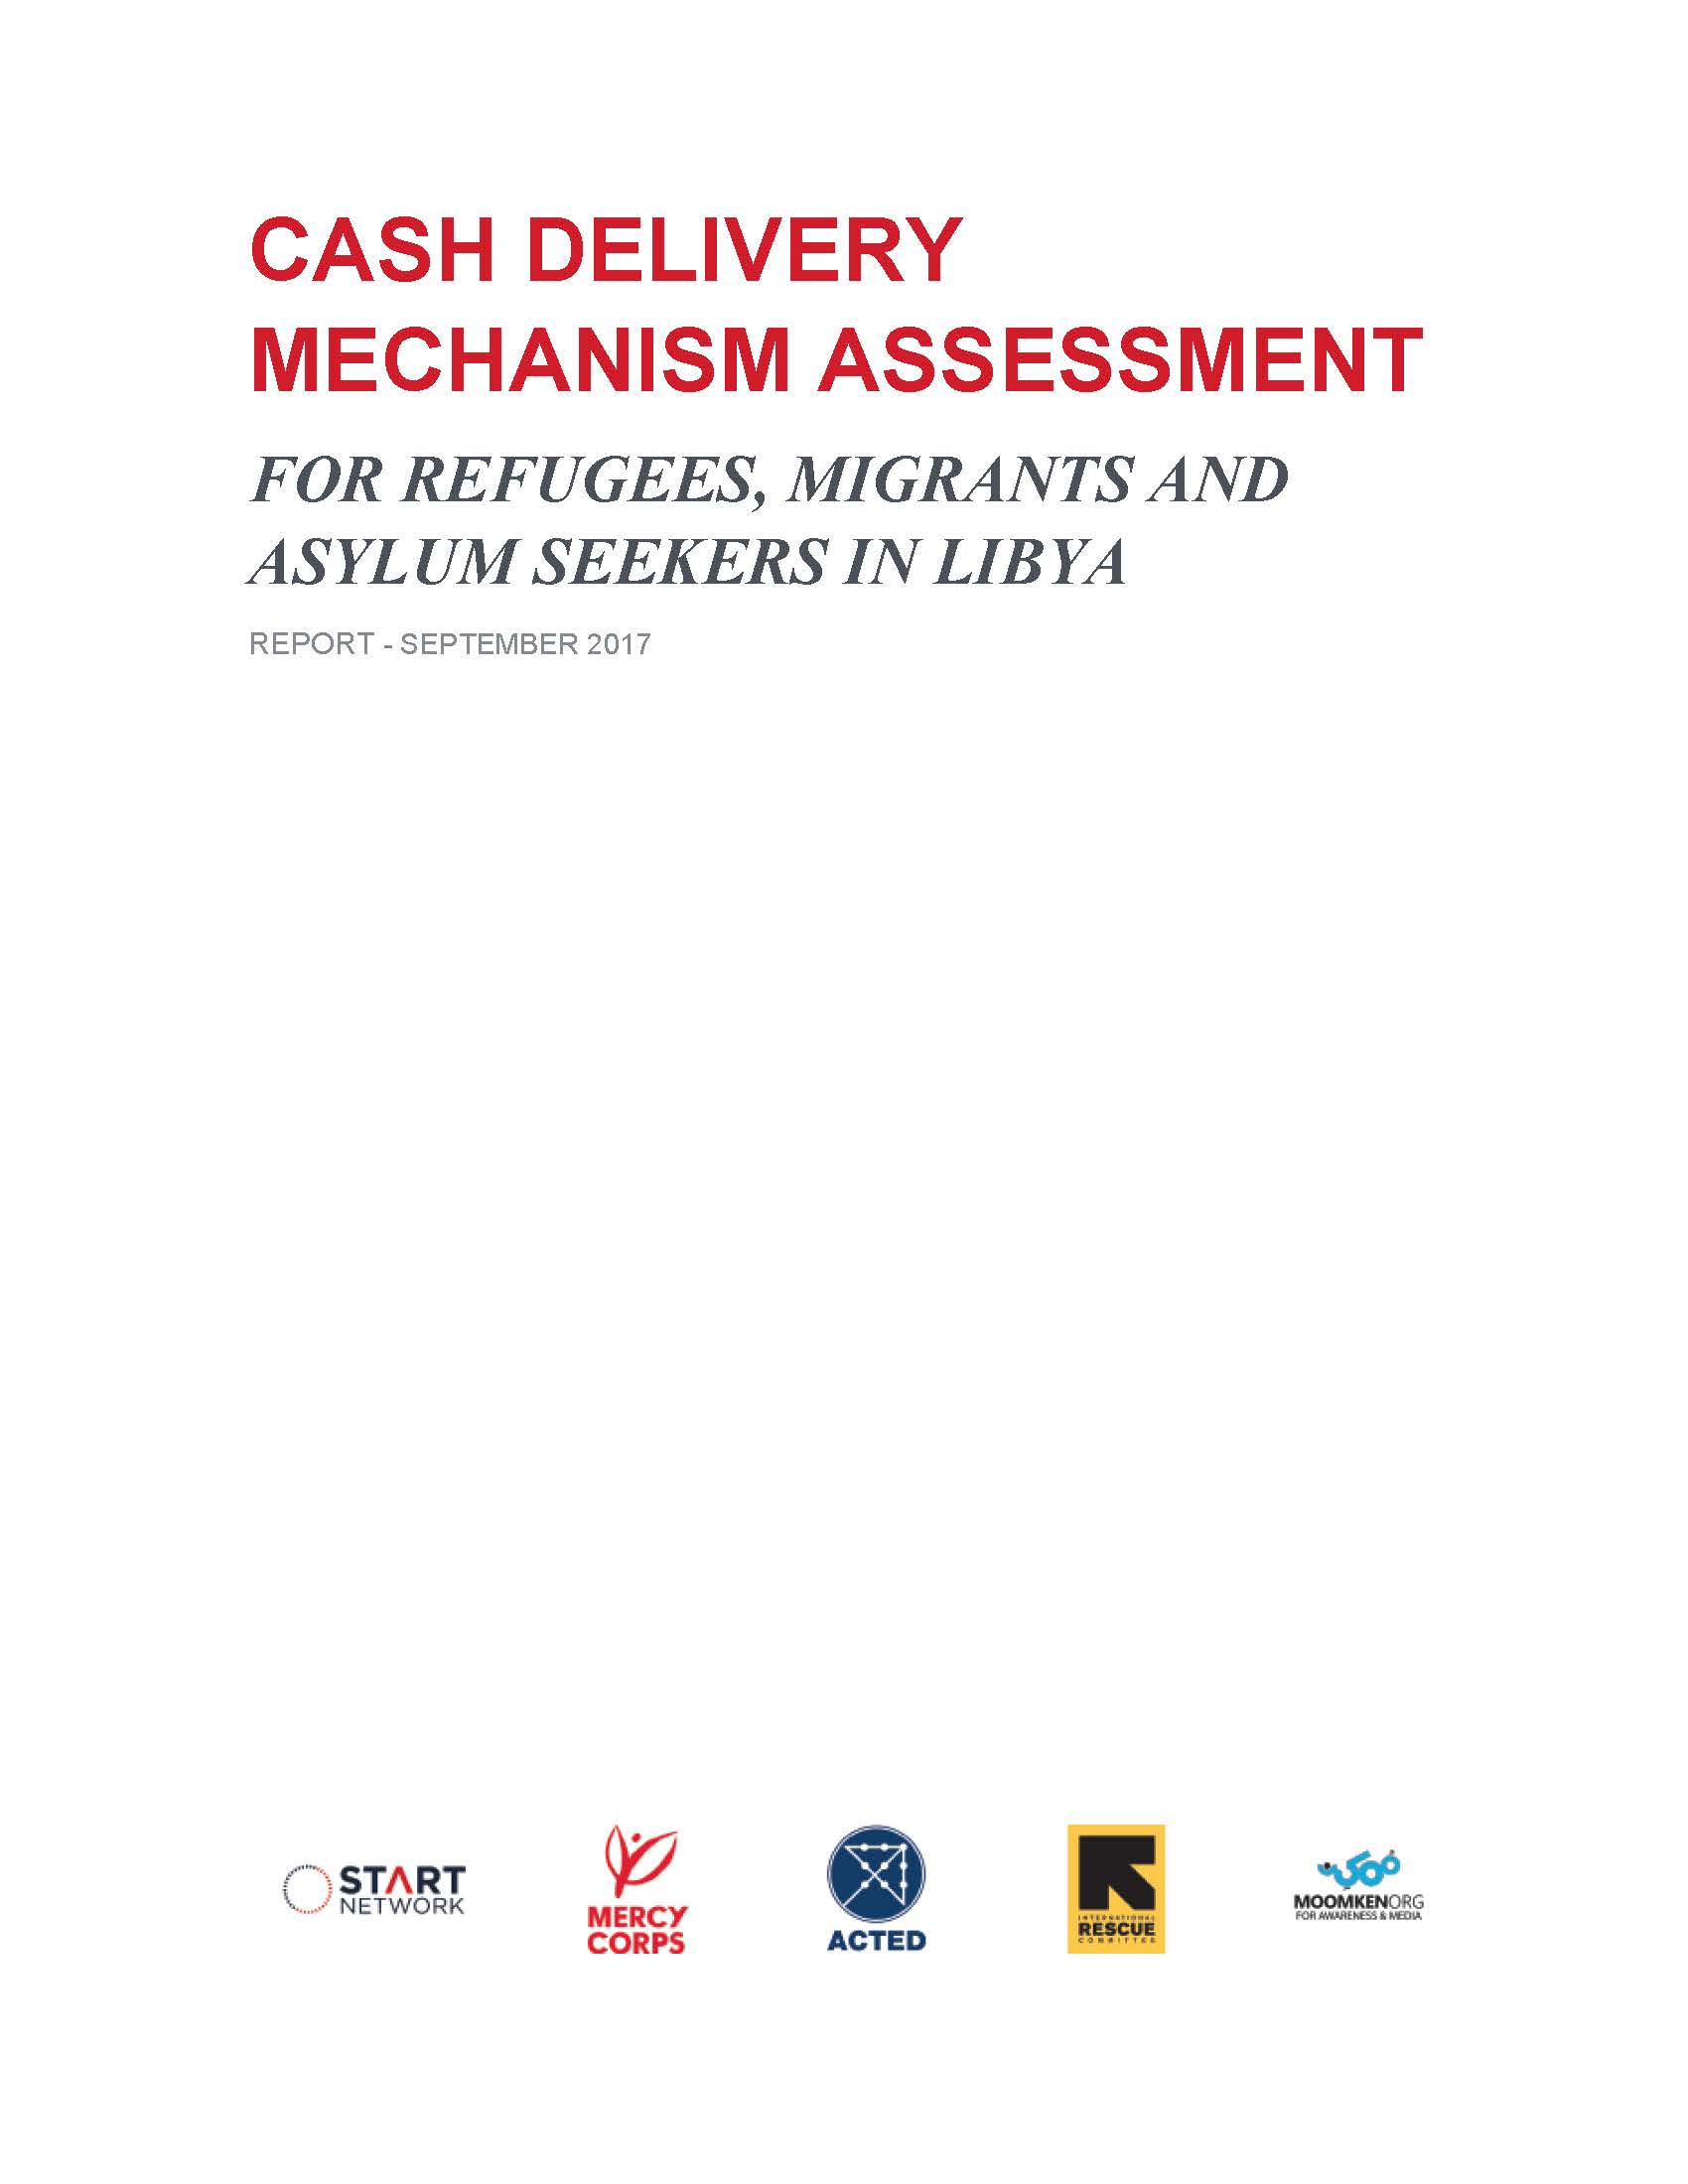 Cash Delivery Mechanism Assessment Report